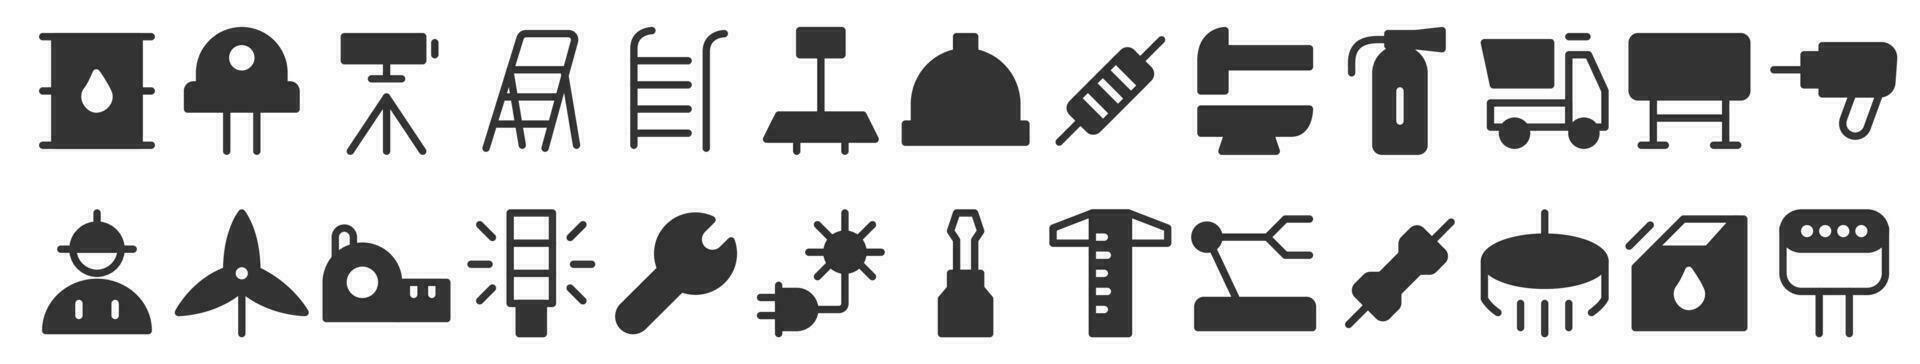 Industry and Environment icons. Vector illustration